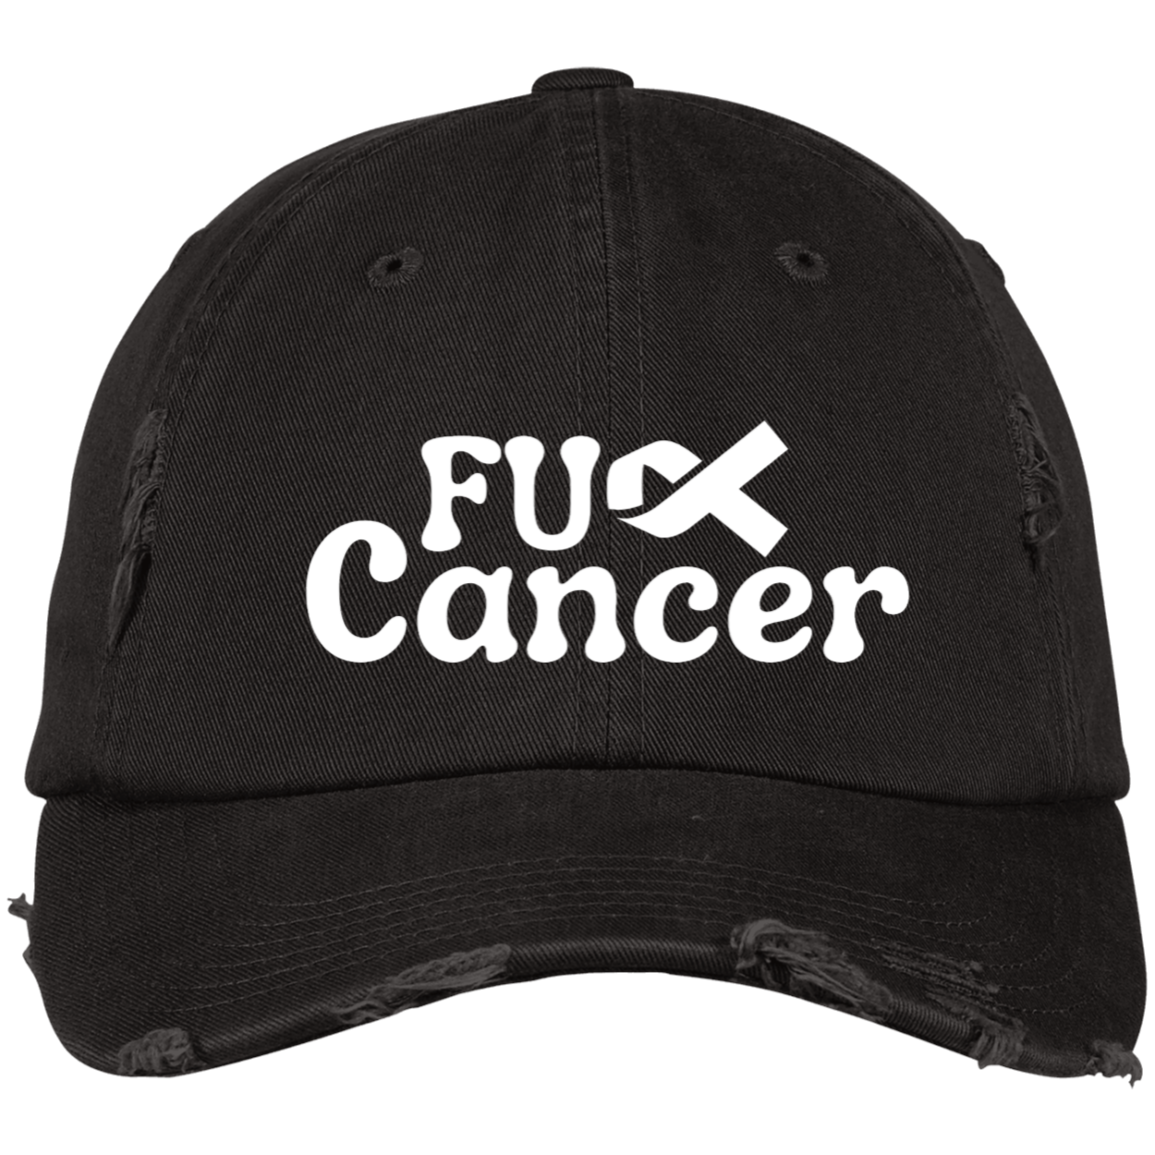 F Cancer Embroidered Distressed Dad Cap